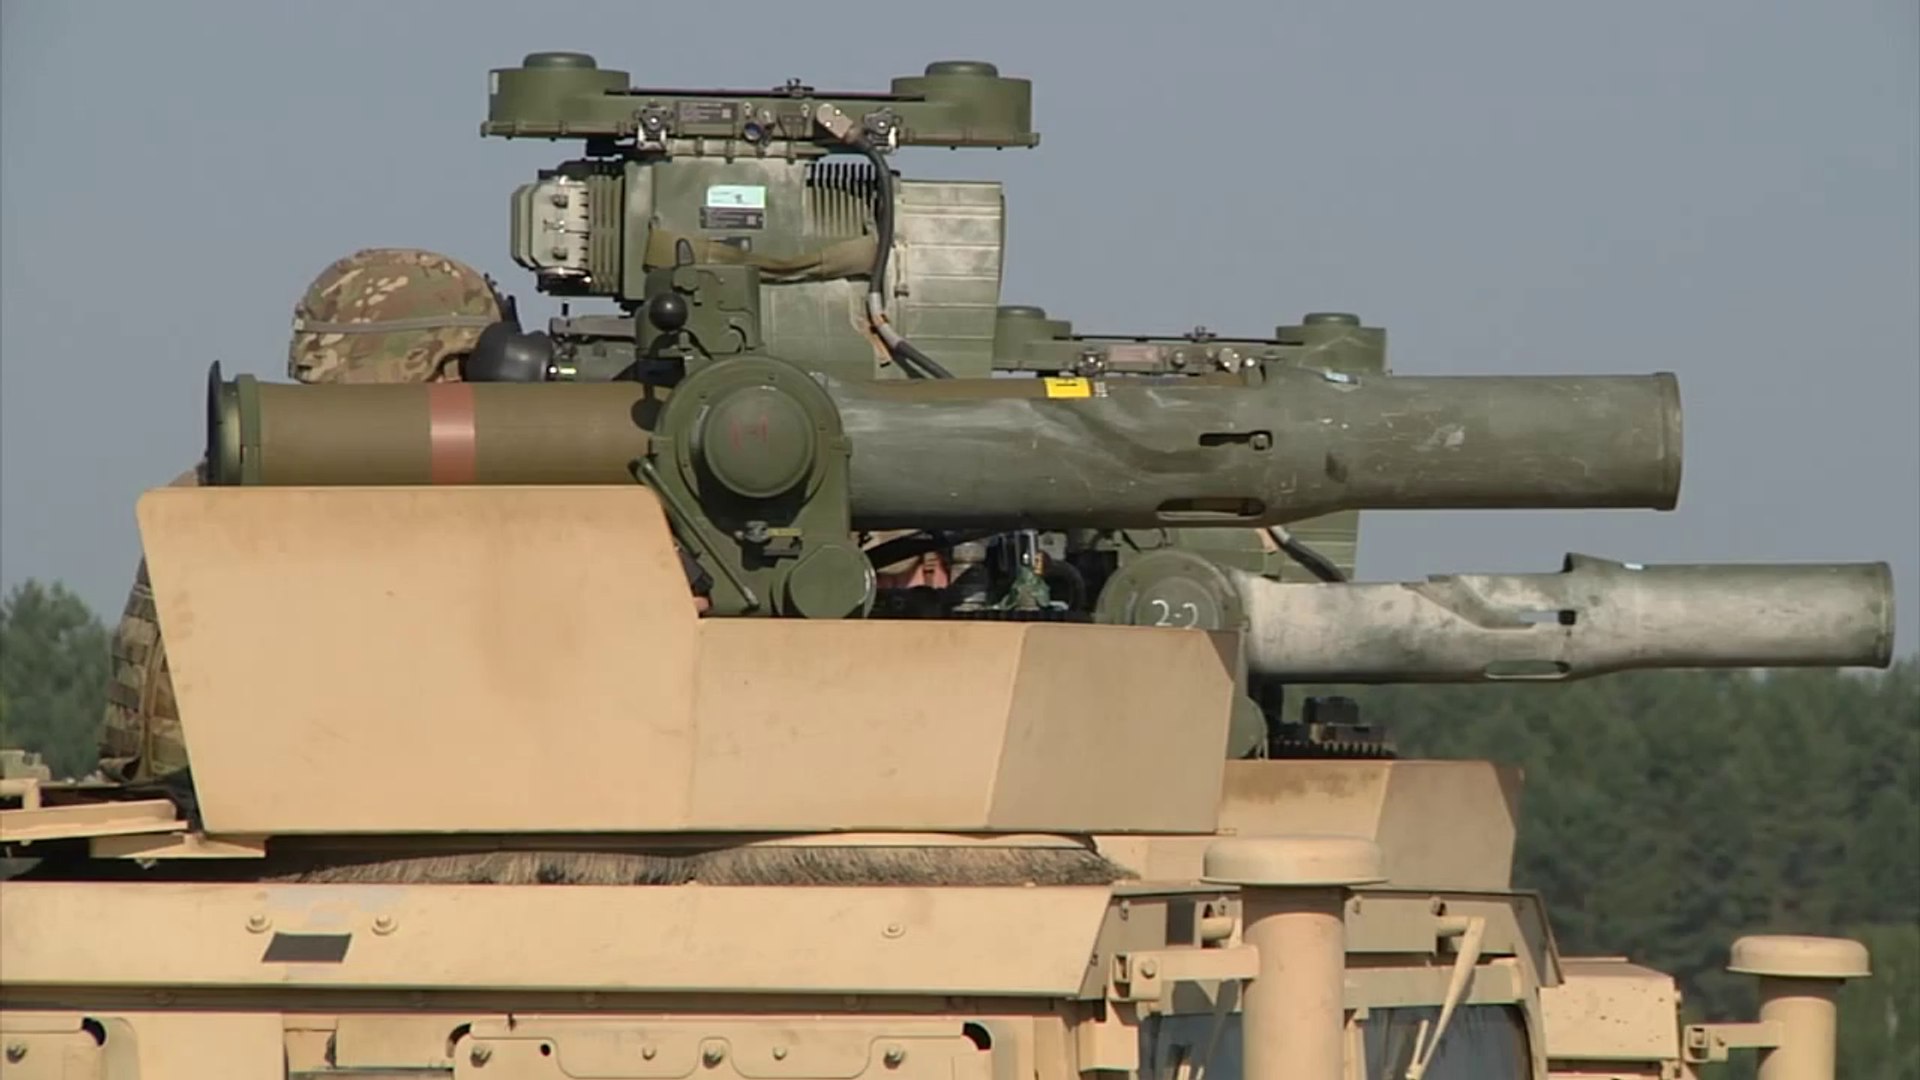 Bgm 71 Tow Missile On A Humvees Can Destroy Any Modern Tank